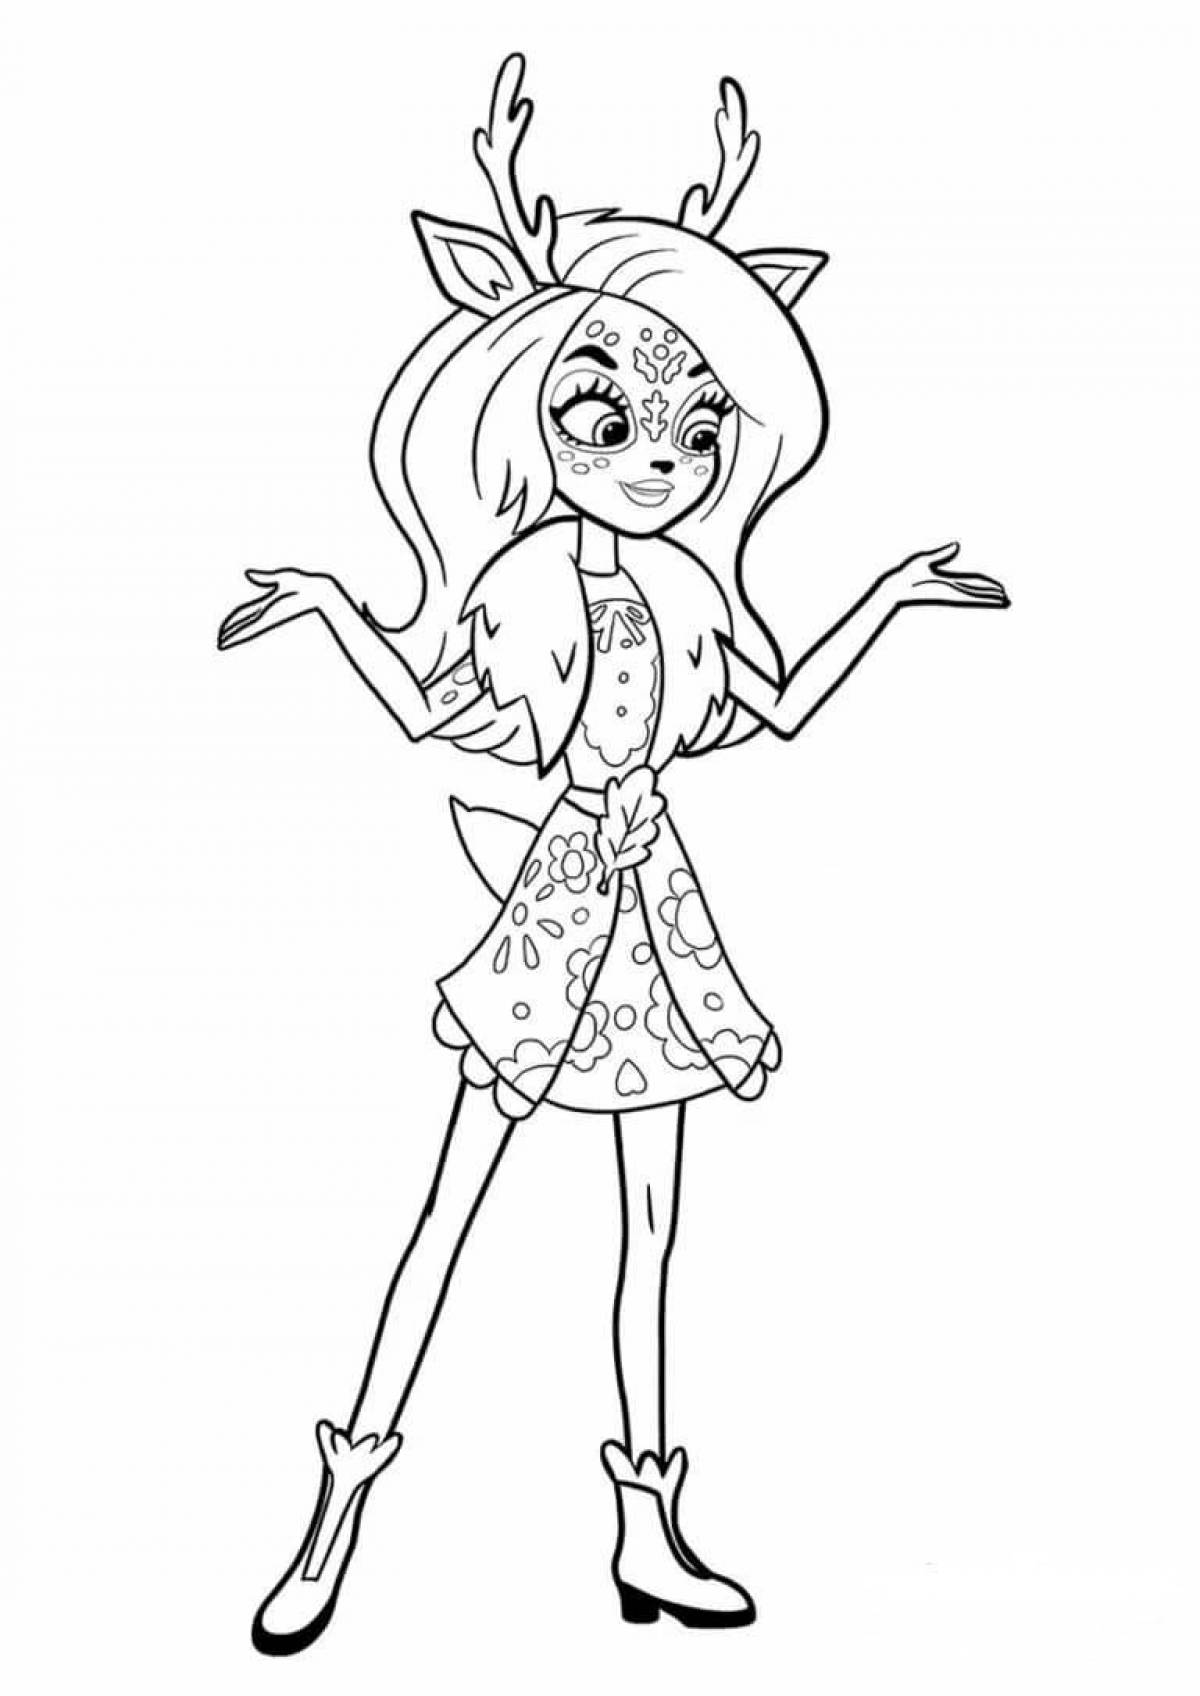 Enchantimals fun coloring pages for kids